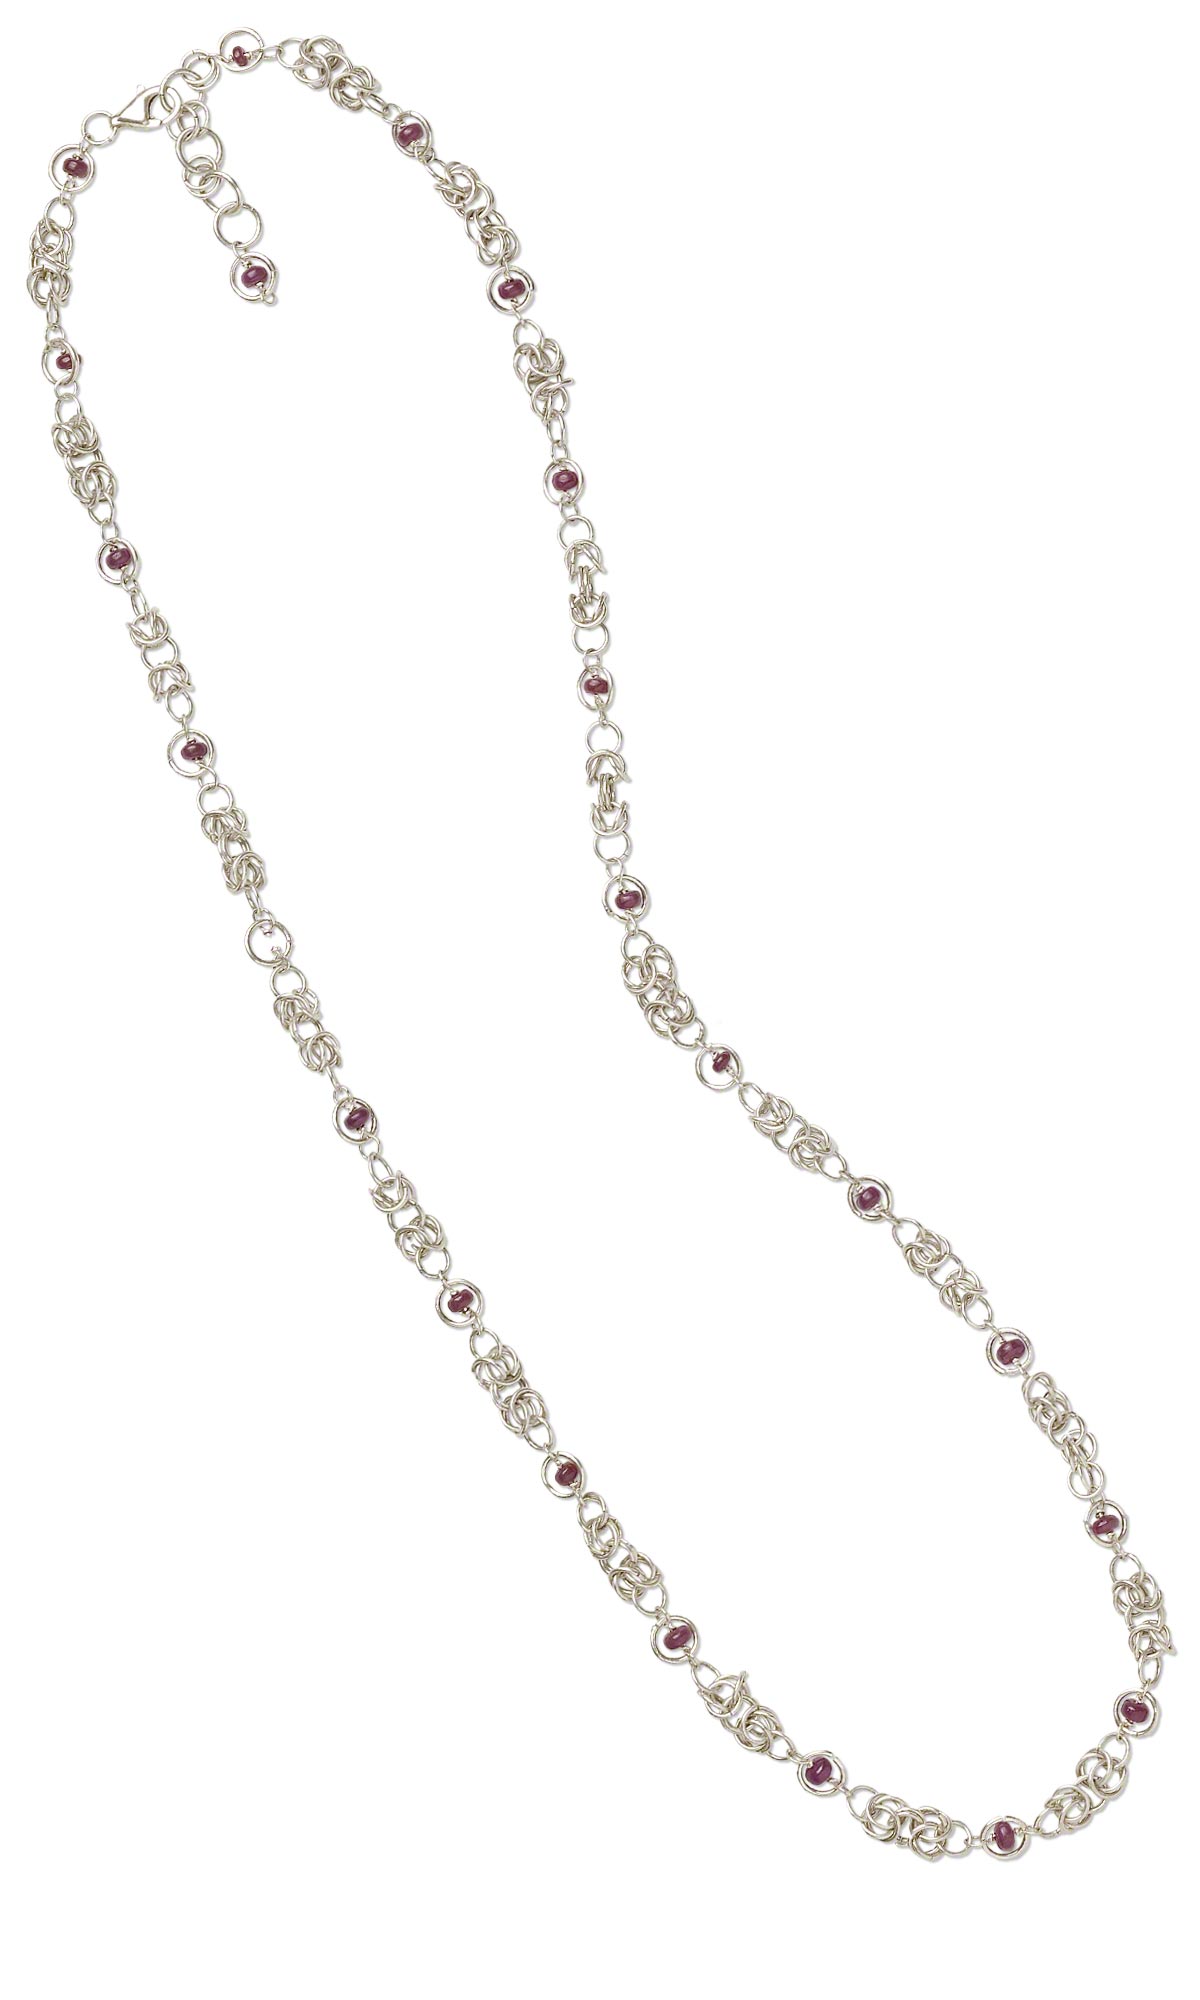 Jewelry Design - Single-Strand Necklace with Ruby Gemstone Beads and ...